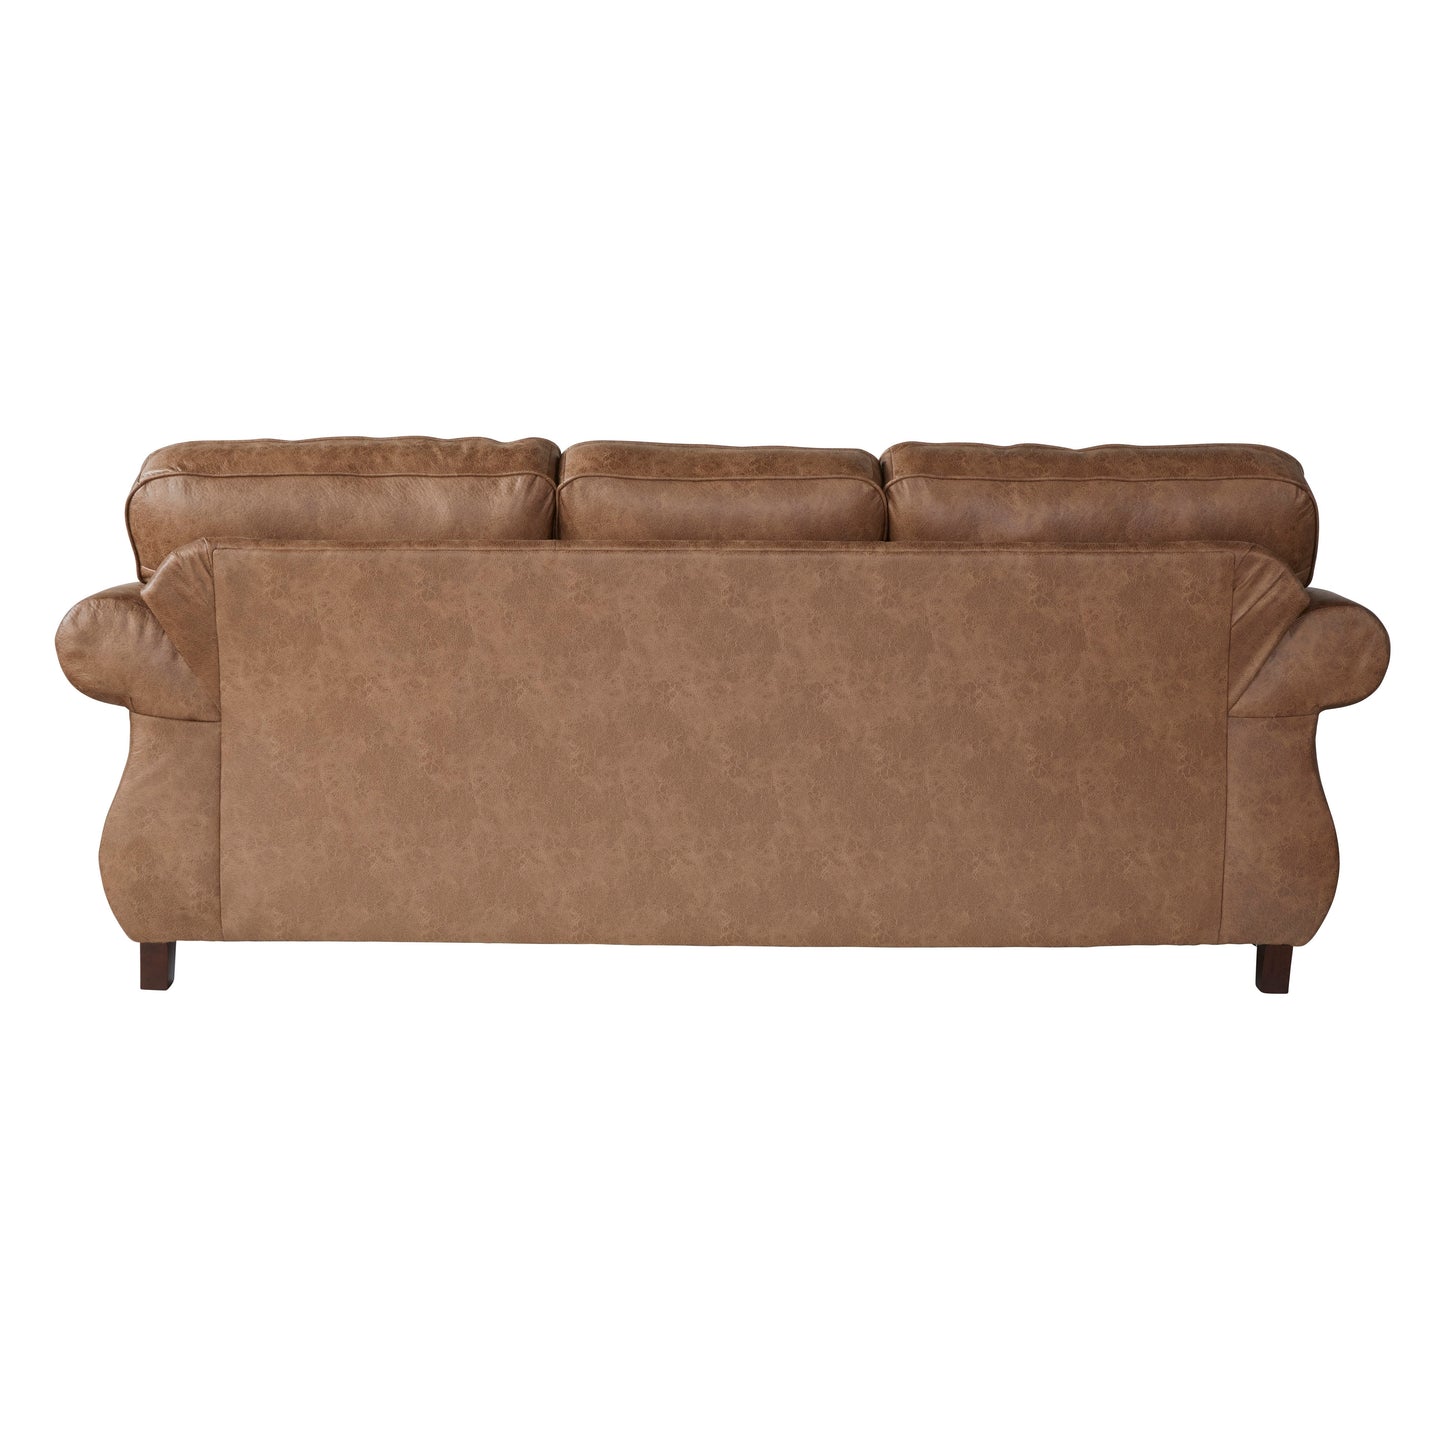 Leinster Faux Leather Living Room Collection with Antique Bronze Nailheads in Jetson Ginger